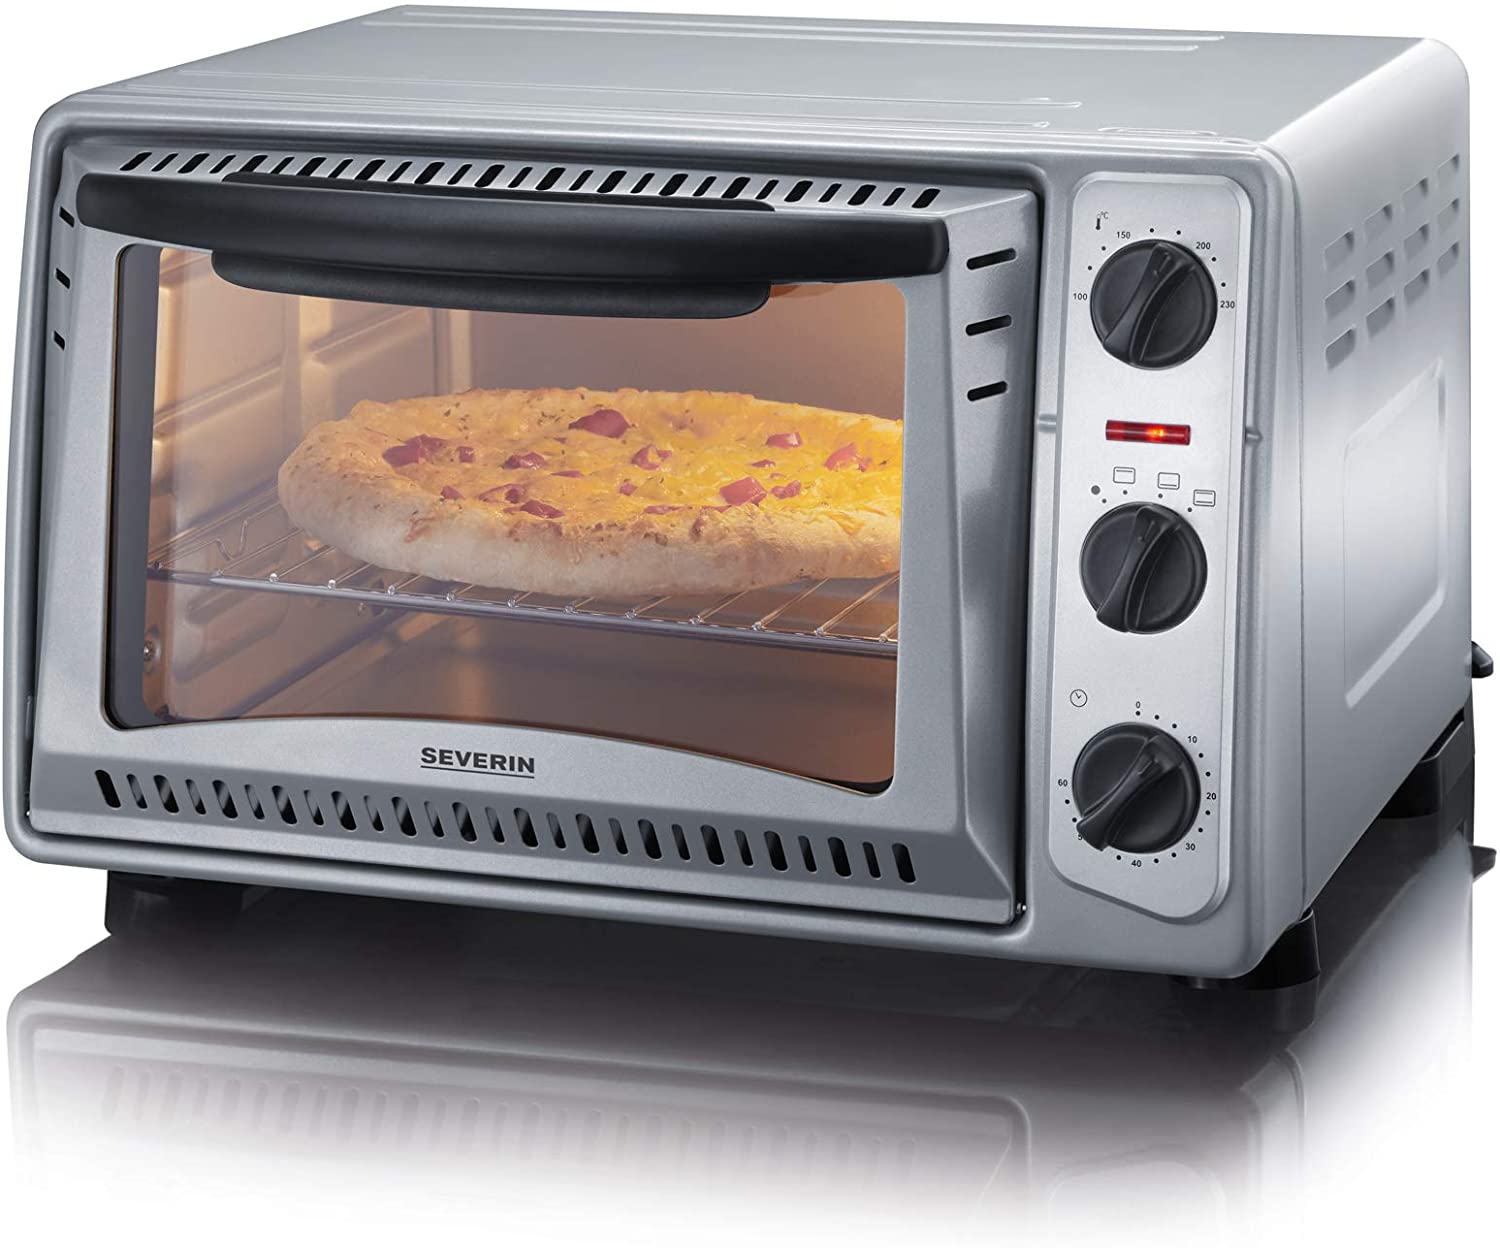 Severin Elektronikgeräte GmbH Severin TO 2045 Baking and Toast Oven, 43 cm, Versatile for the Preparation of Pizza, Fries, Roasts or Casseroles, for Baking Cakes/Silver